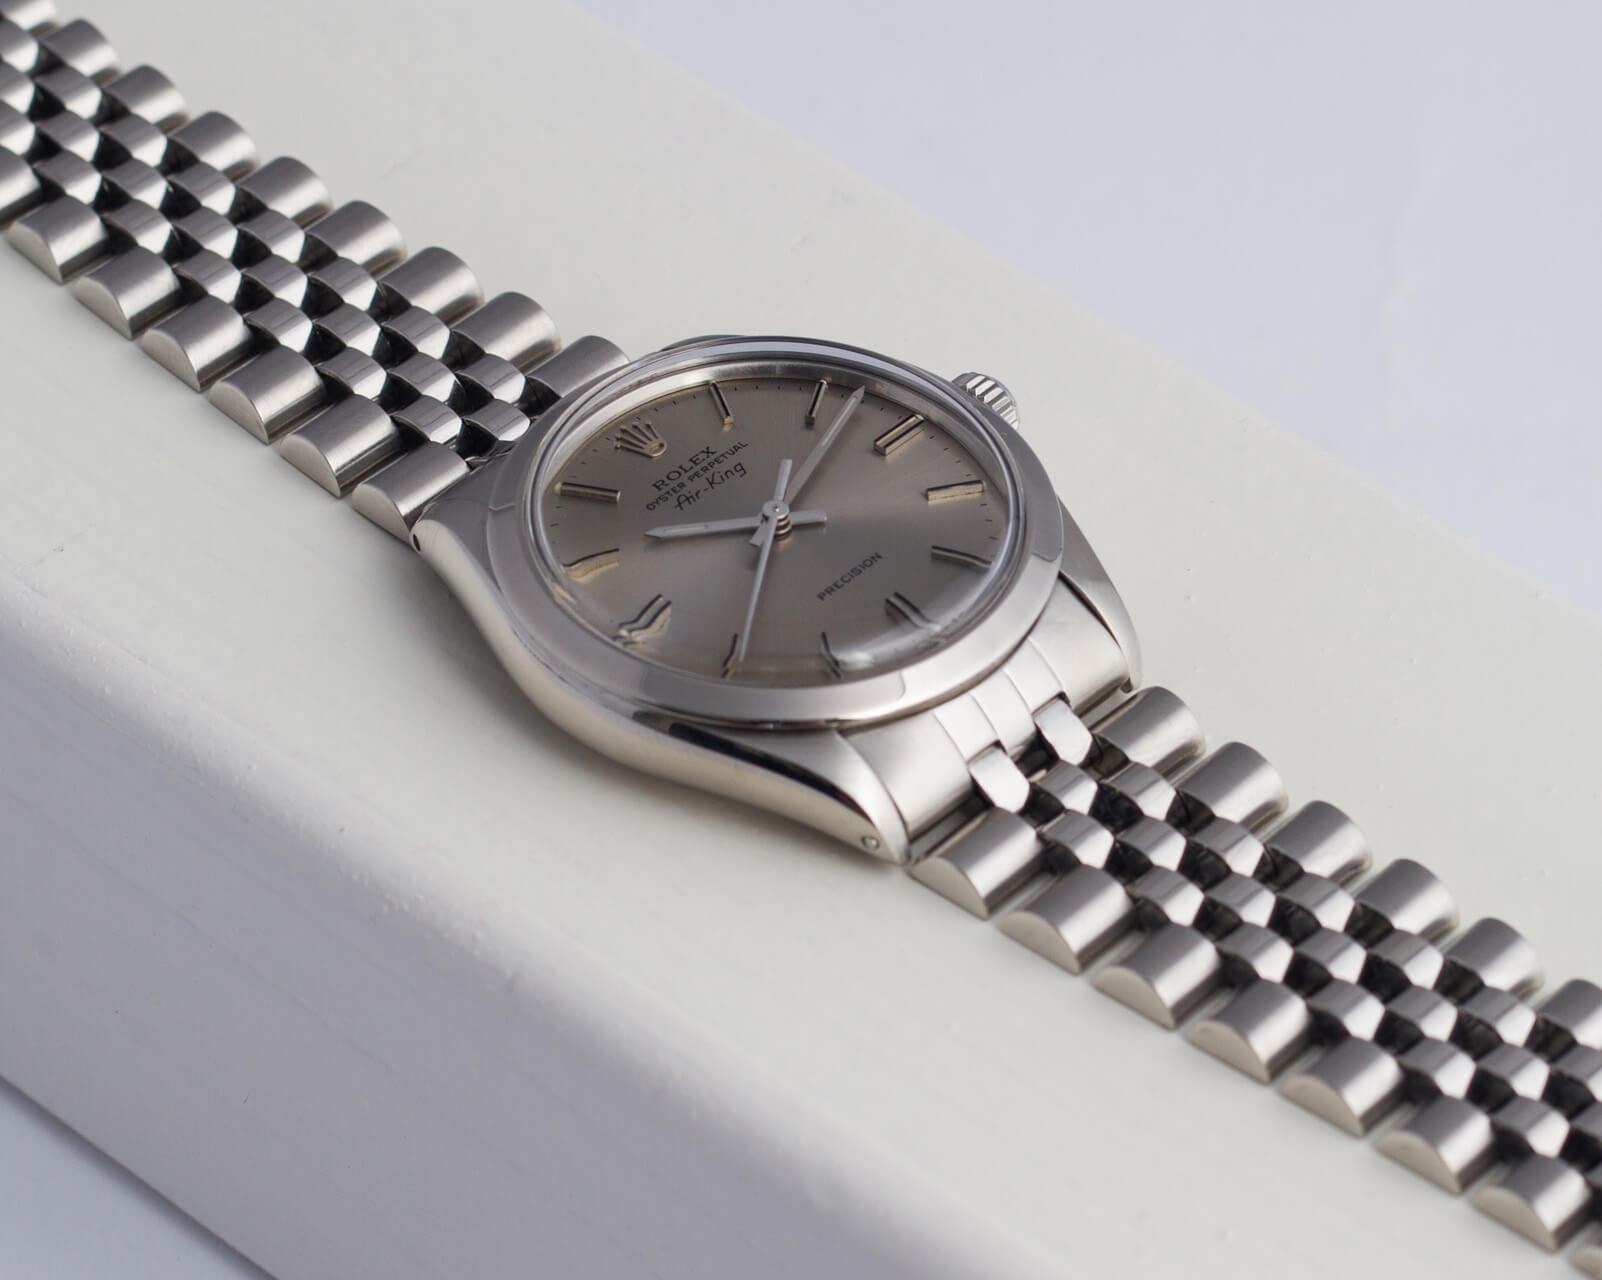 ROLEX  AIRKING REFERENCE 14010 A STAINLESS STEEL WRISTWATCH WITH BRACELET  CIRCA 2000  Watches Weekly  Hong Kong  2020  Sothebys